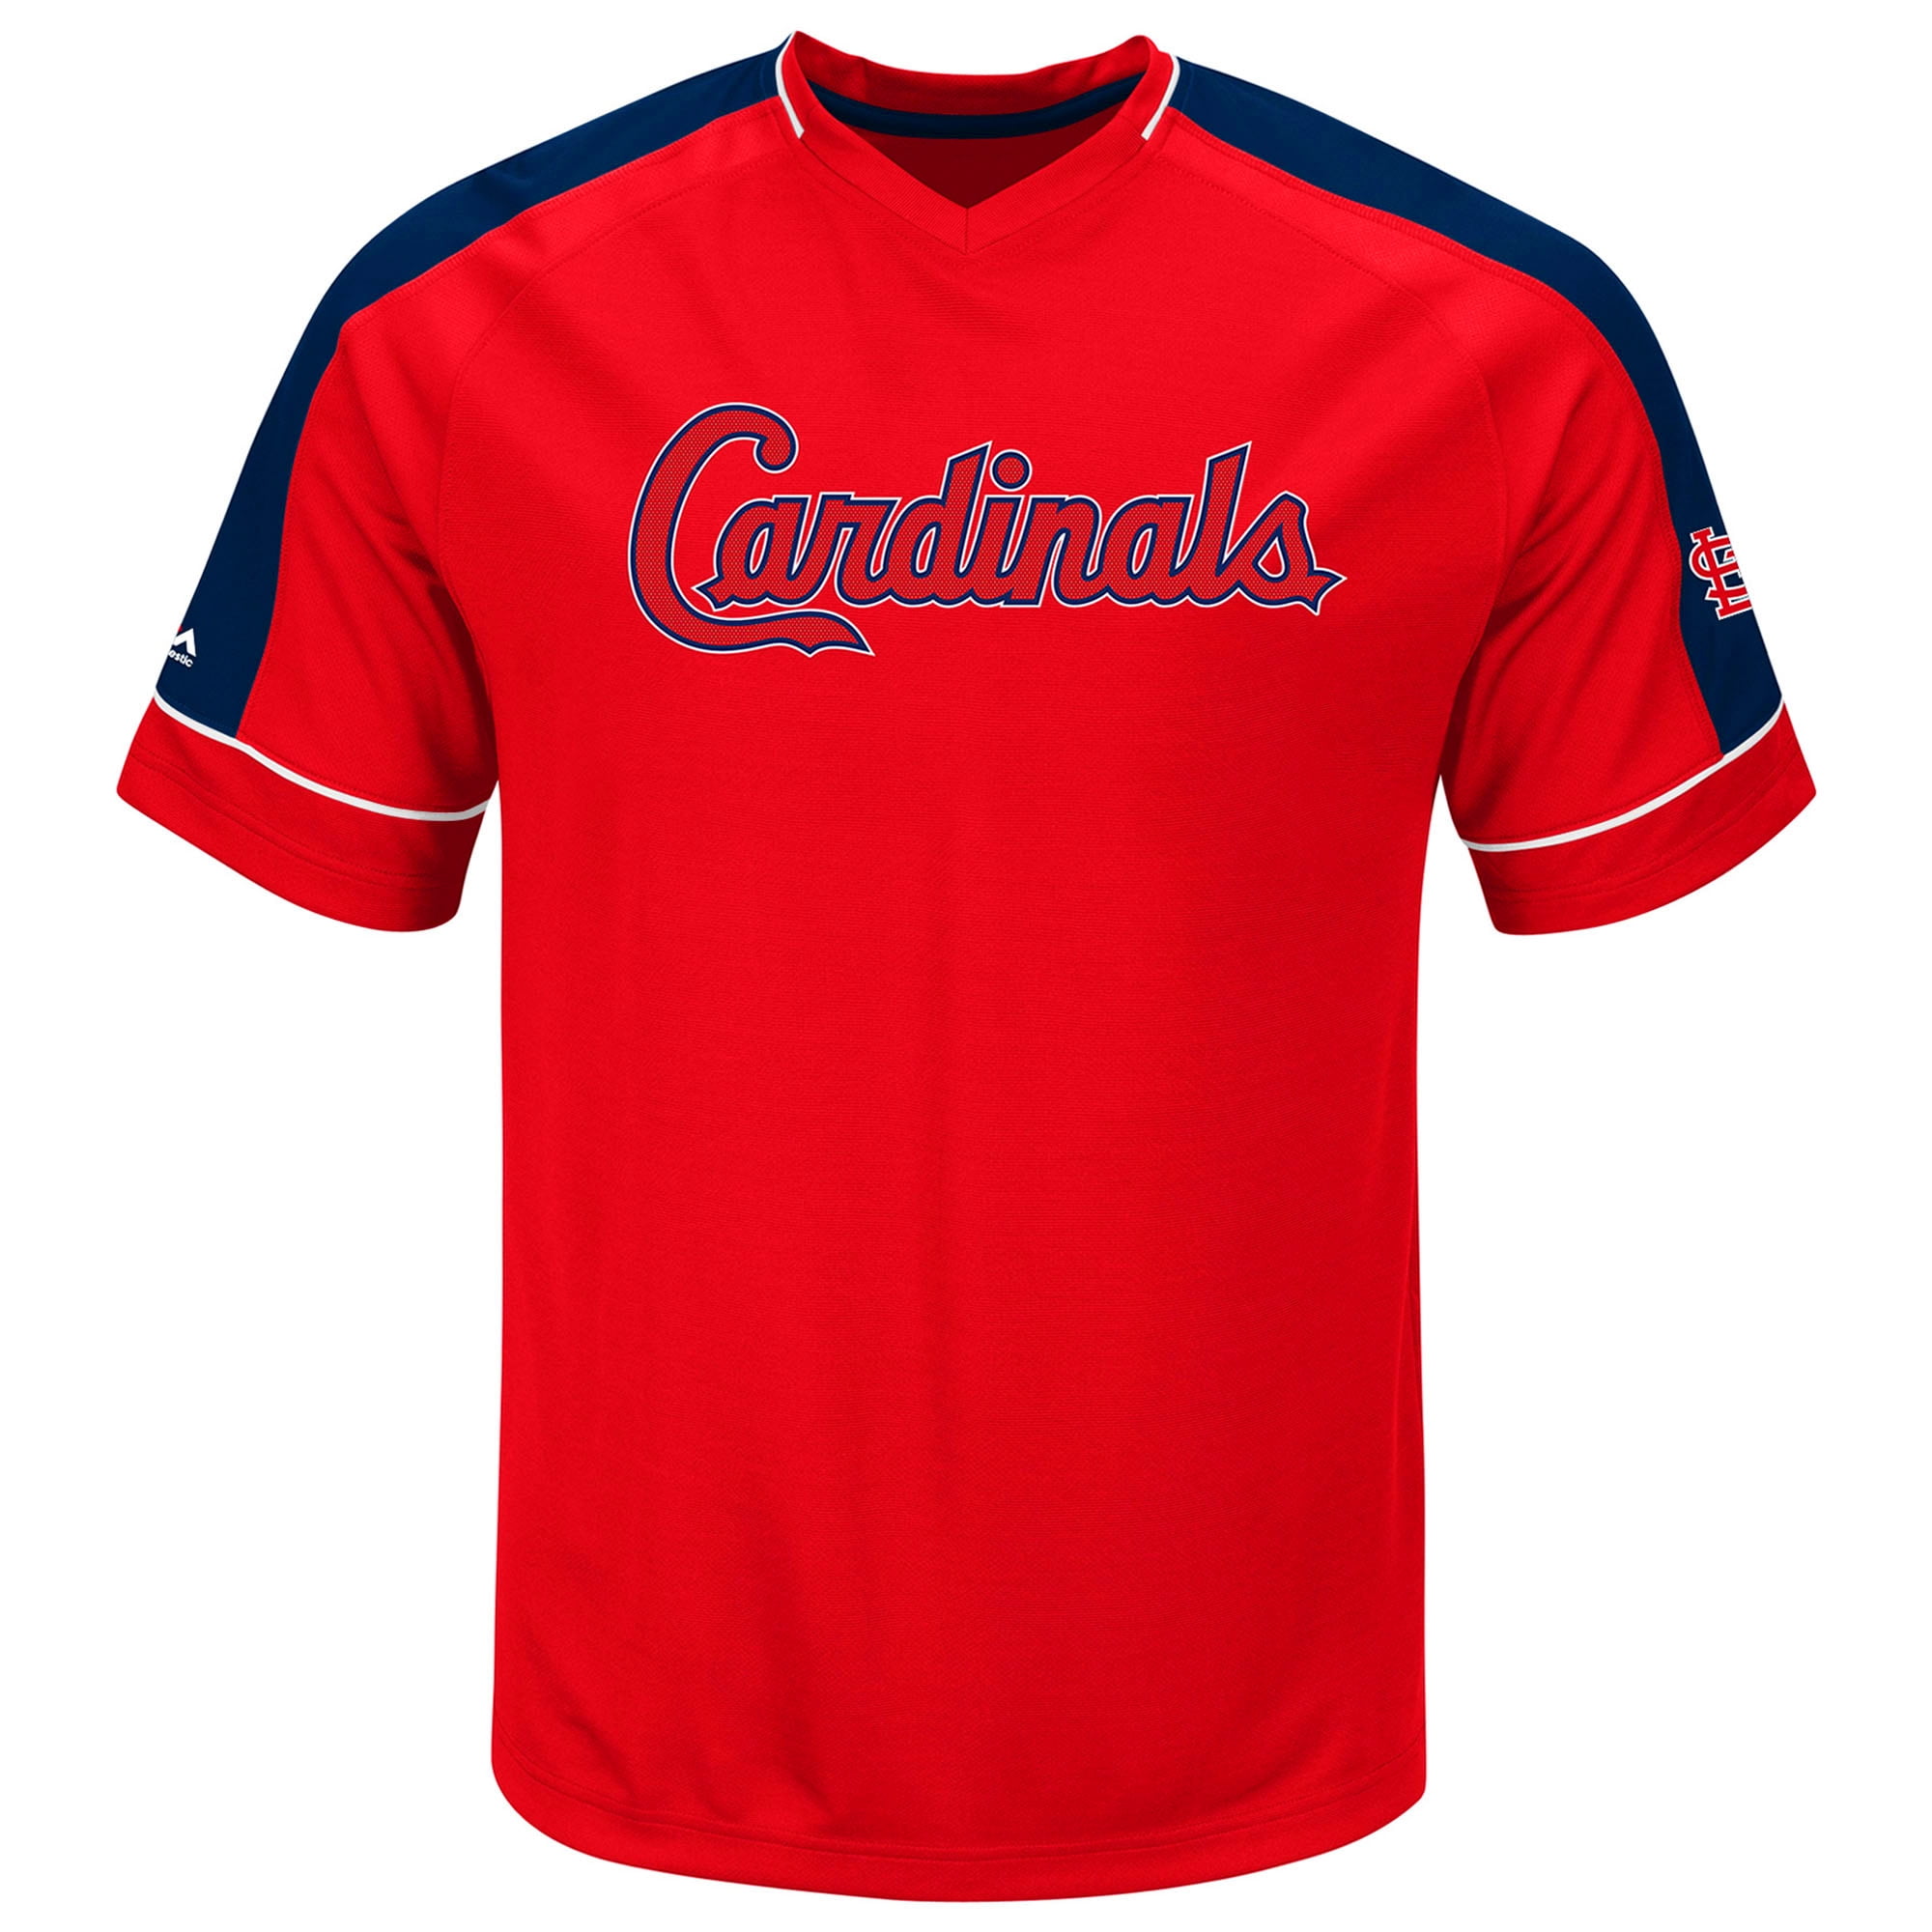 St. Louis Cardinals Majestic Lead Hitter T-Shirt - Red - 0 - 0